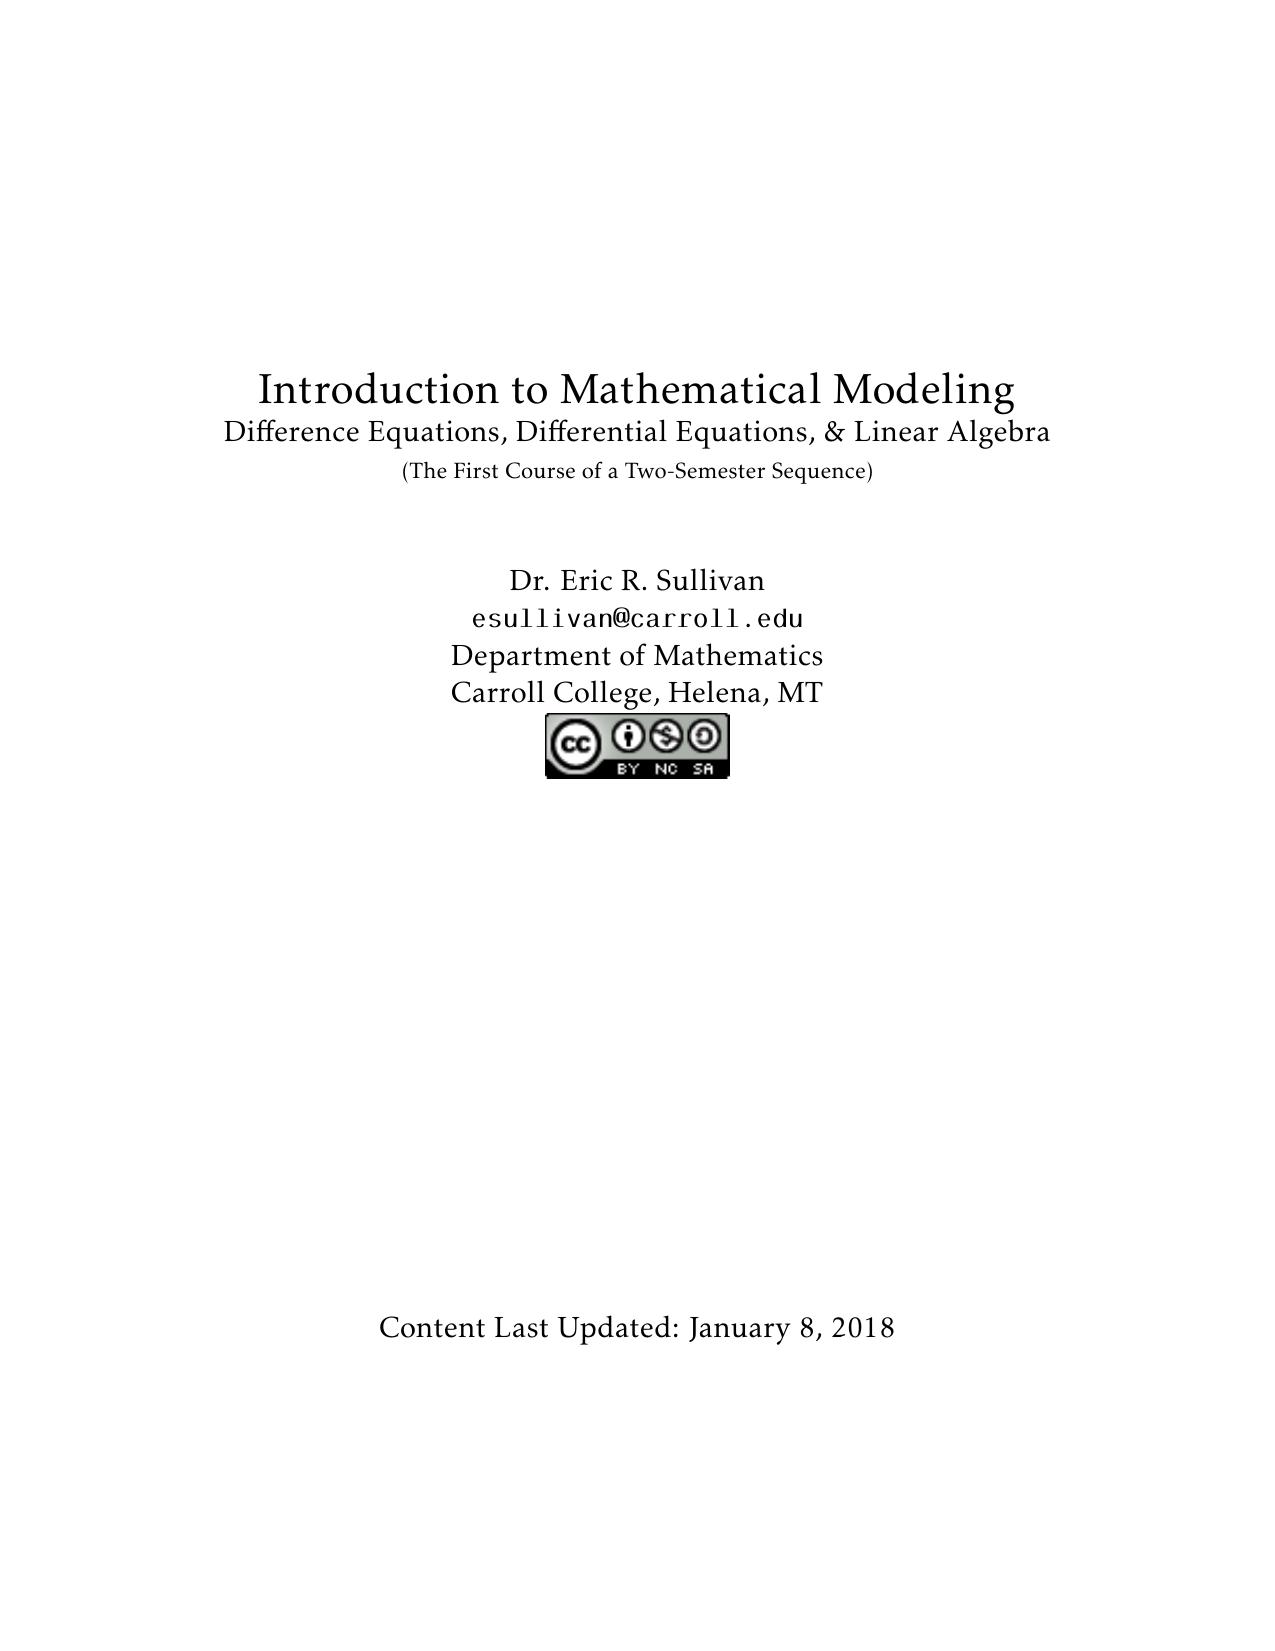 Introduction to mathematical Modeling Notes 2018